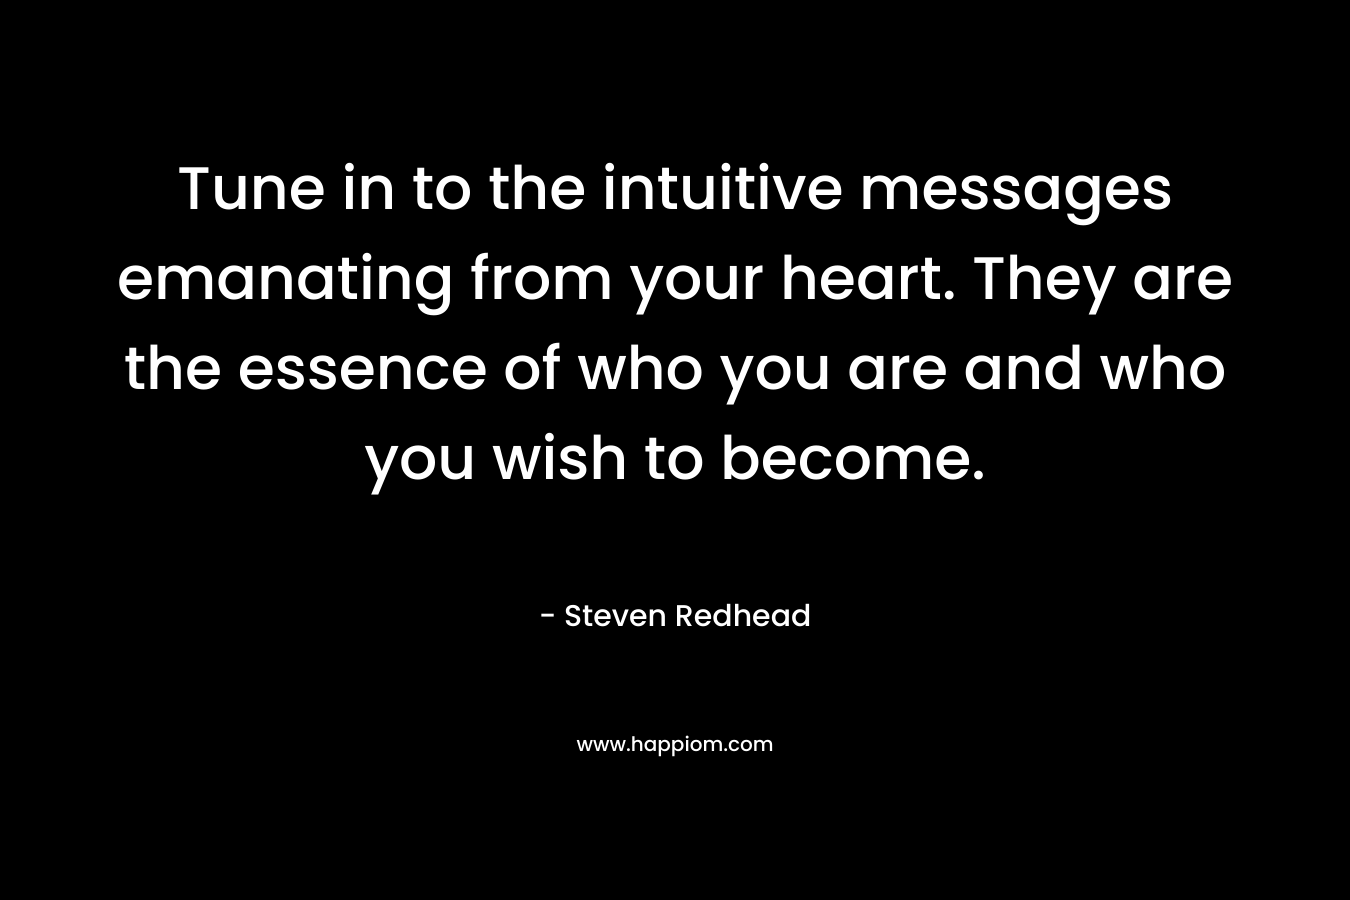 Tune in to the intuitive messages emanating from your heart. They are the essence of who you are and who you wish to become.